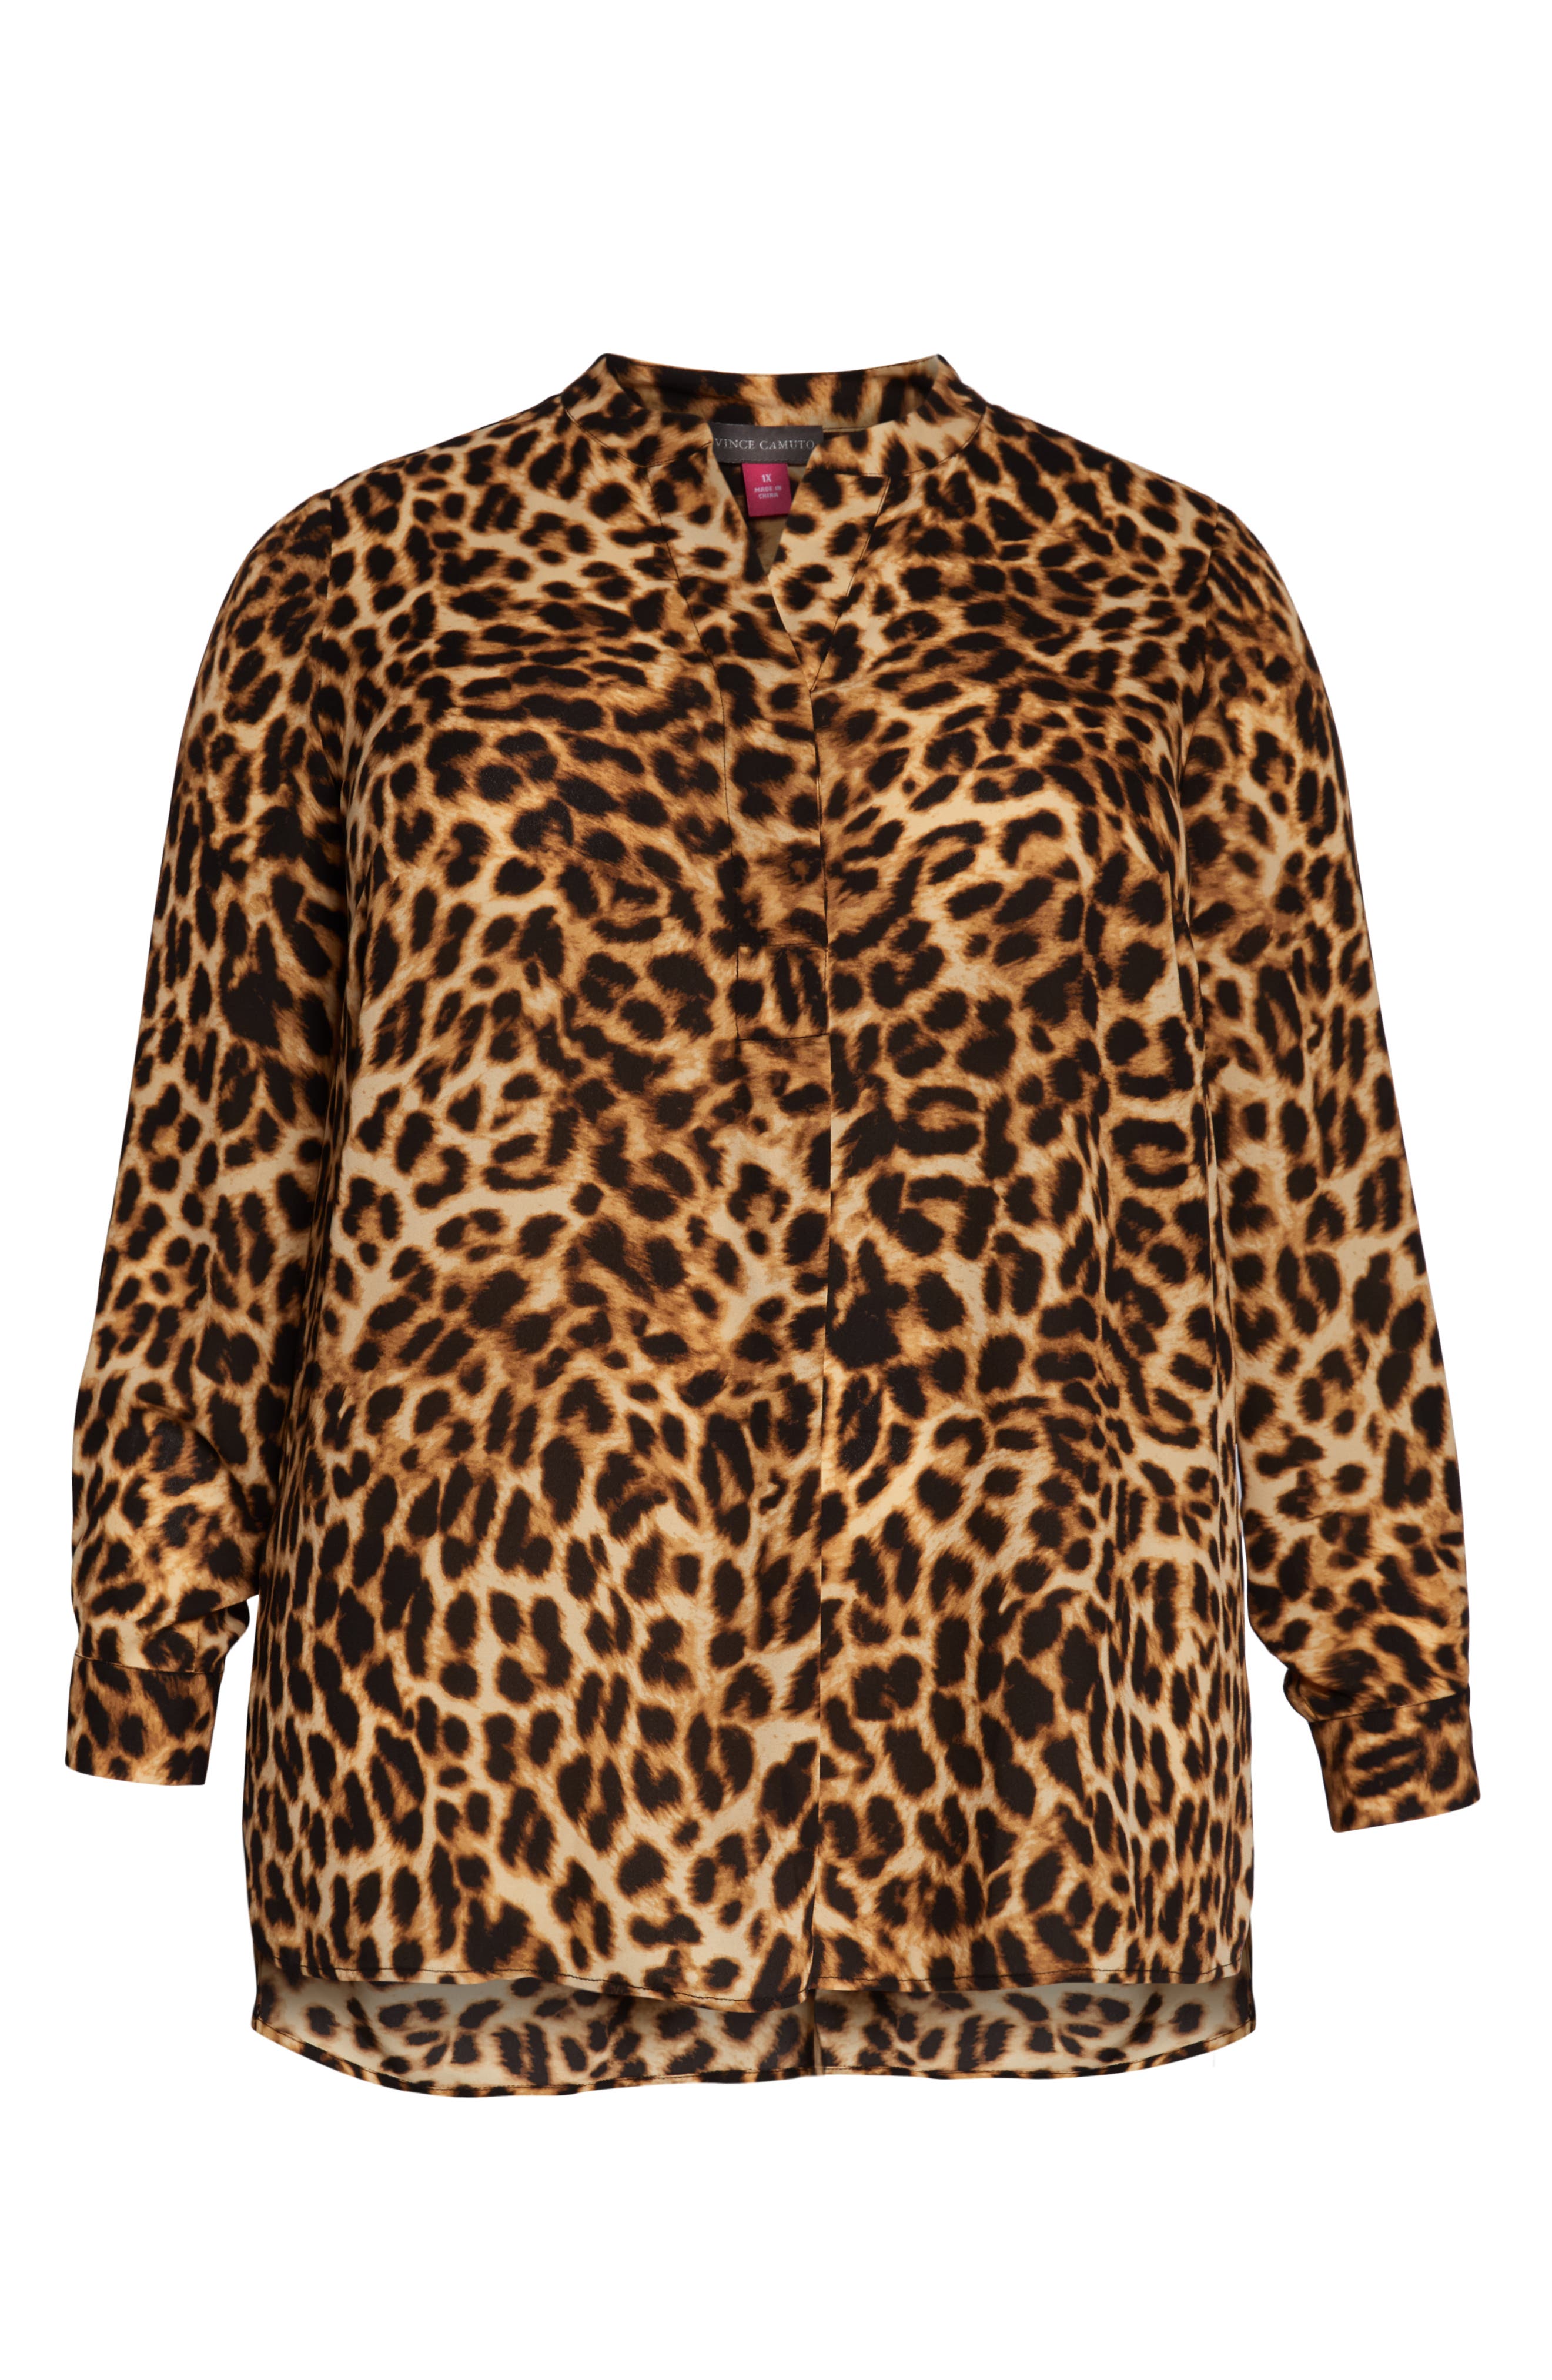 Vince Camuto | Leopard Print Tunic Top | Nordstrom Rack